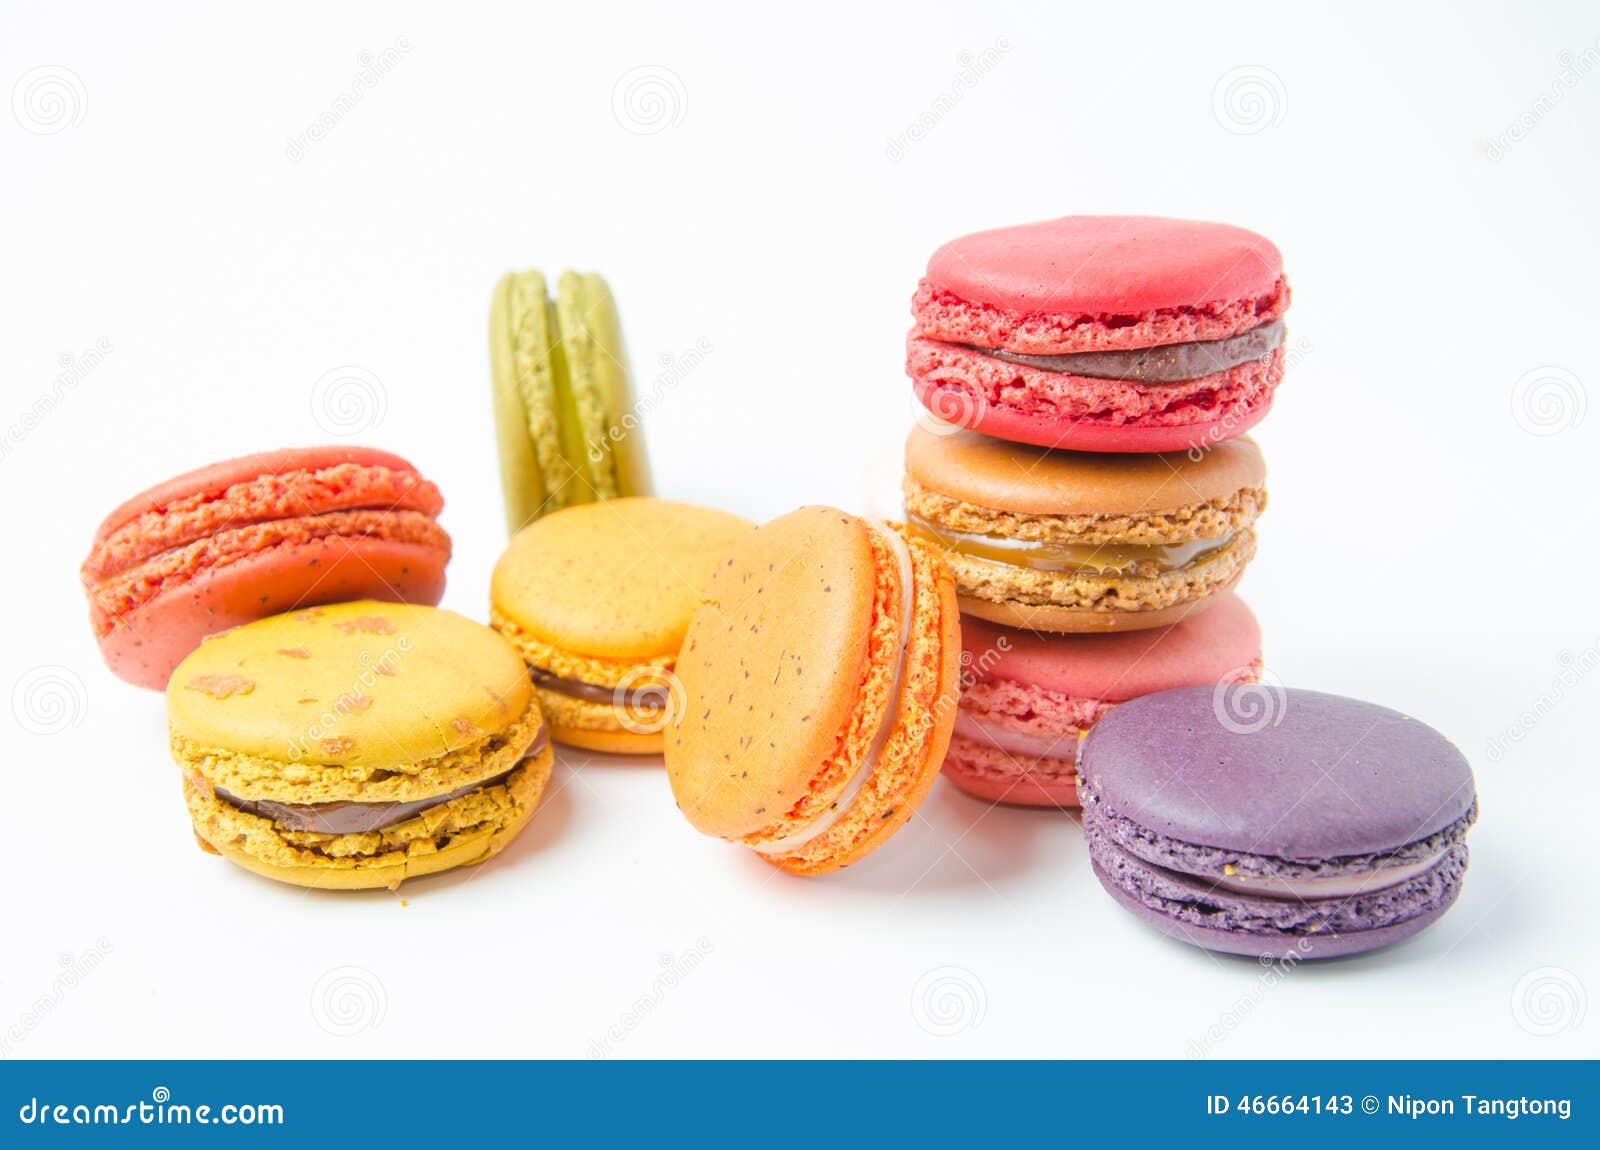 Colorful of Macaroons on White Background Stock Image - Image of flavor ...